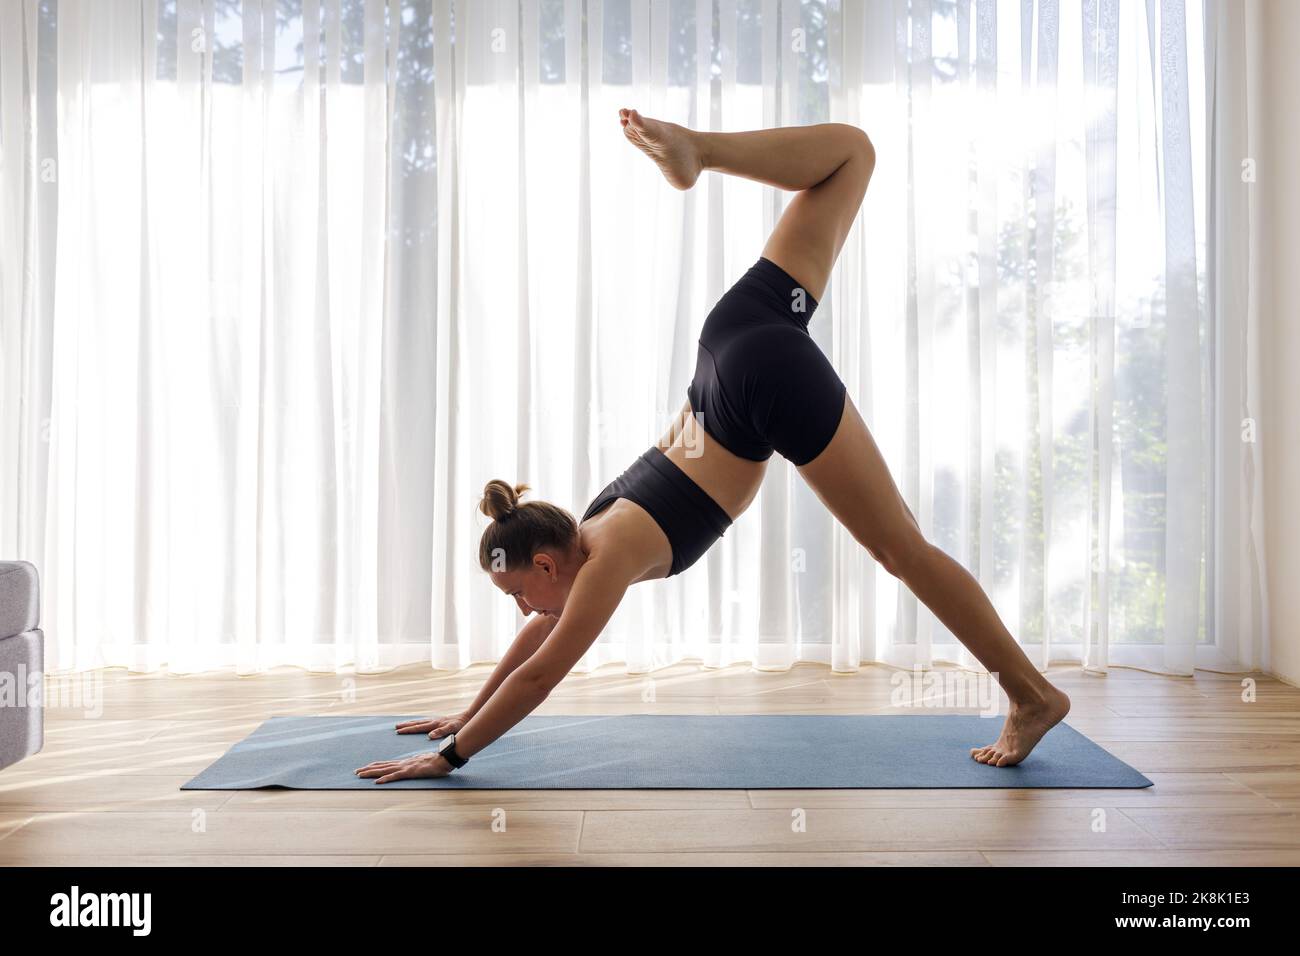 Triple the Fun: 3 Person Yoga Poses for a Dynamic Workout!